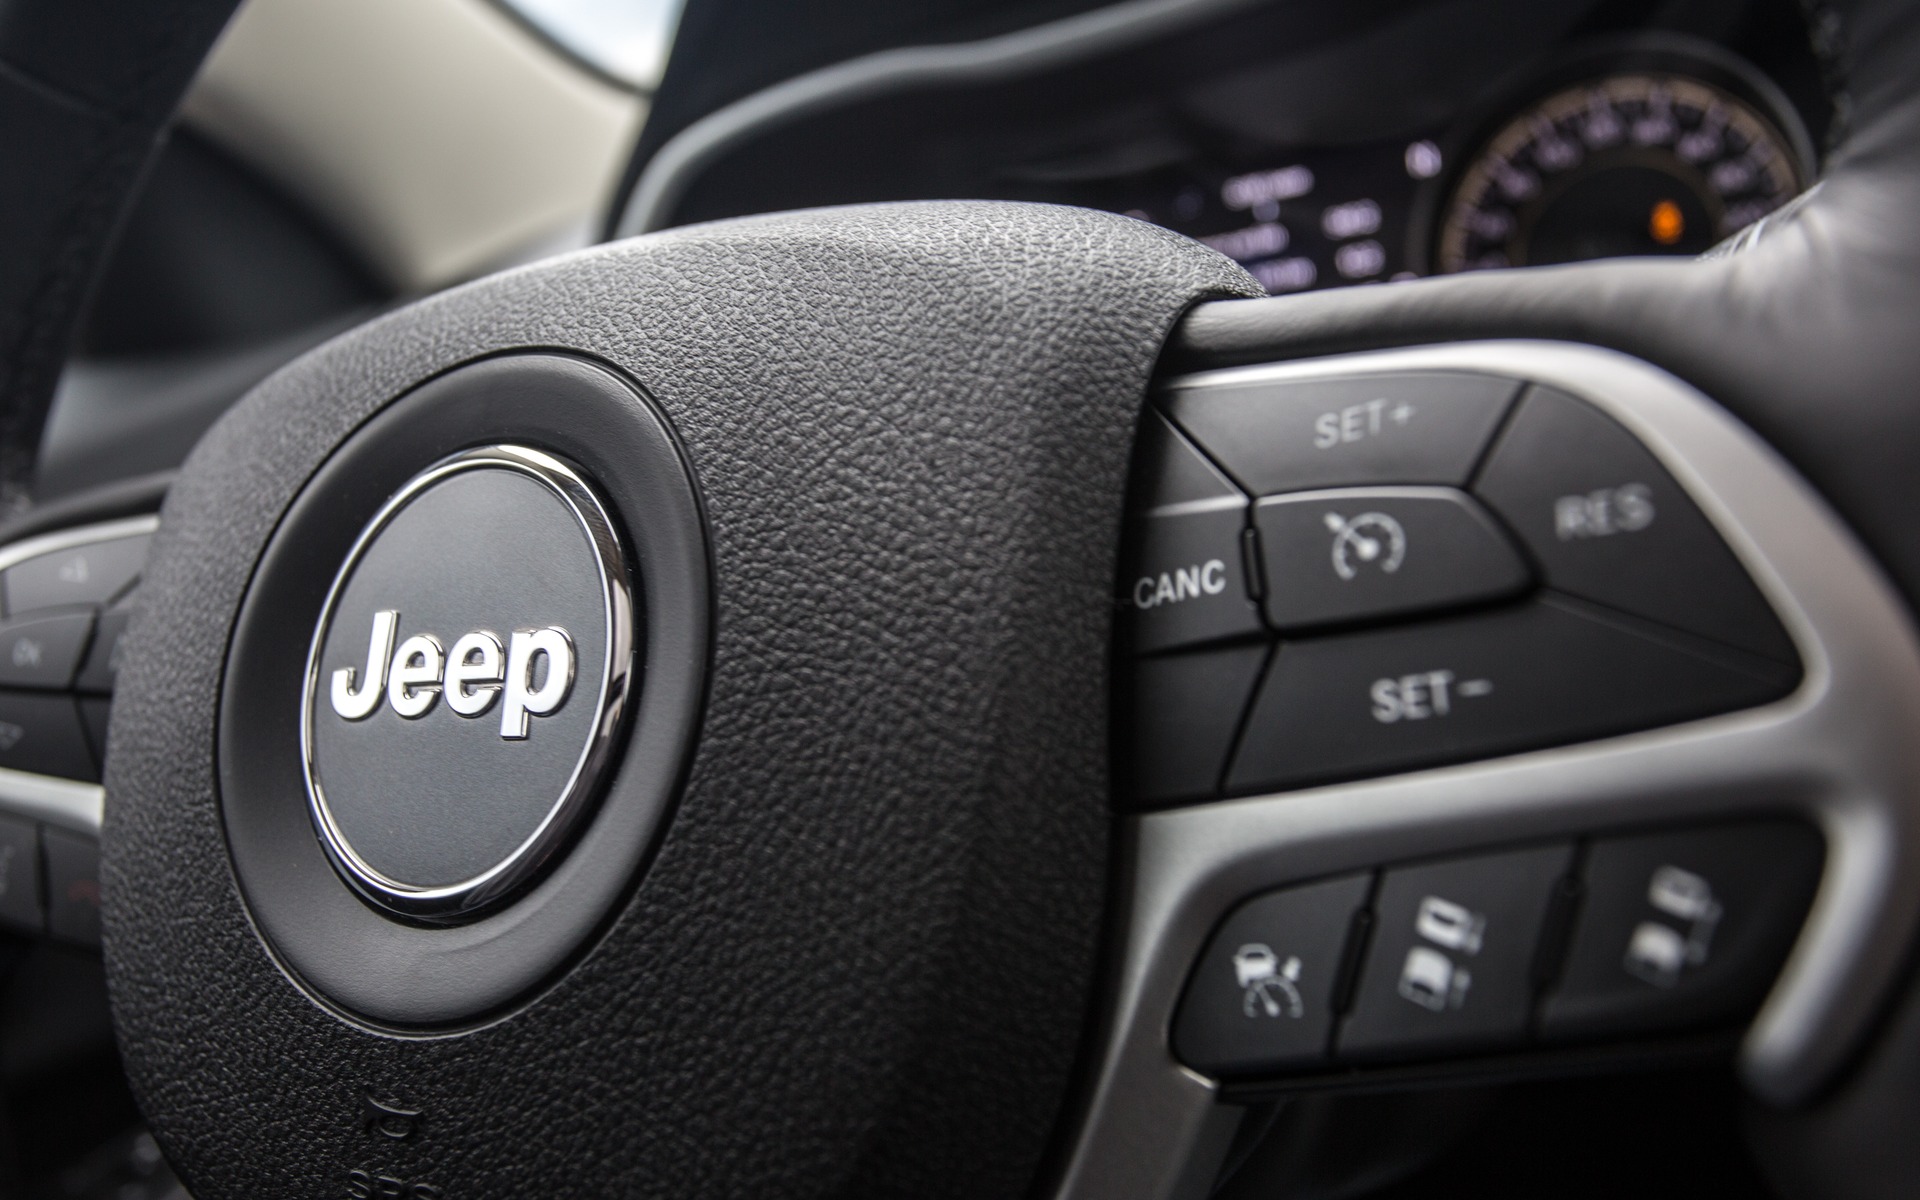 The Jeep has eight buttons to control the cruise control!